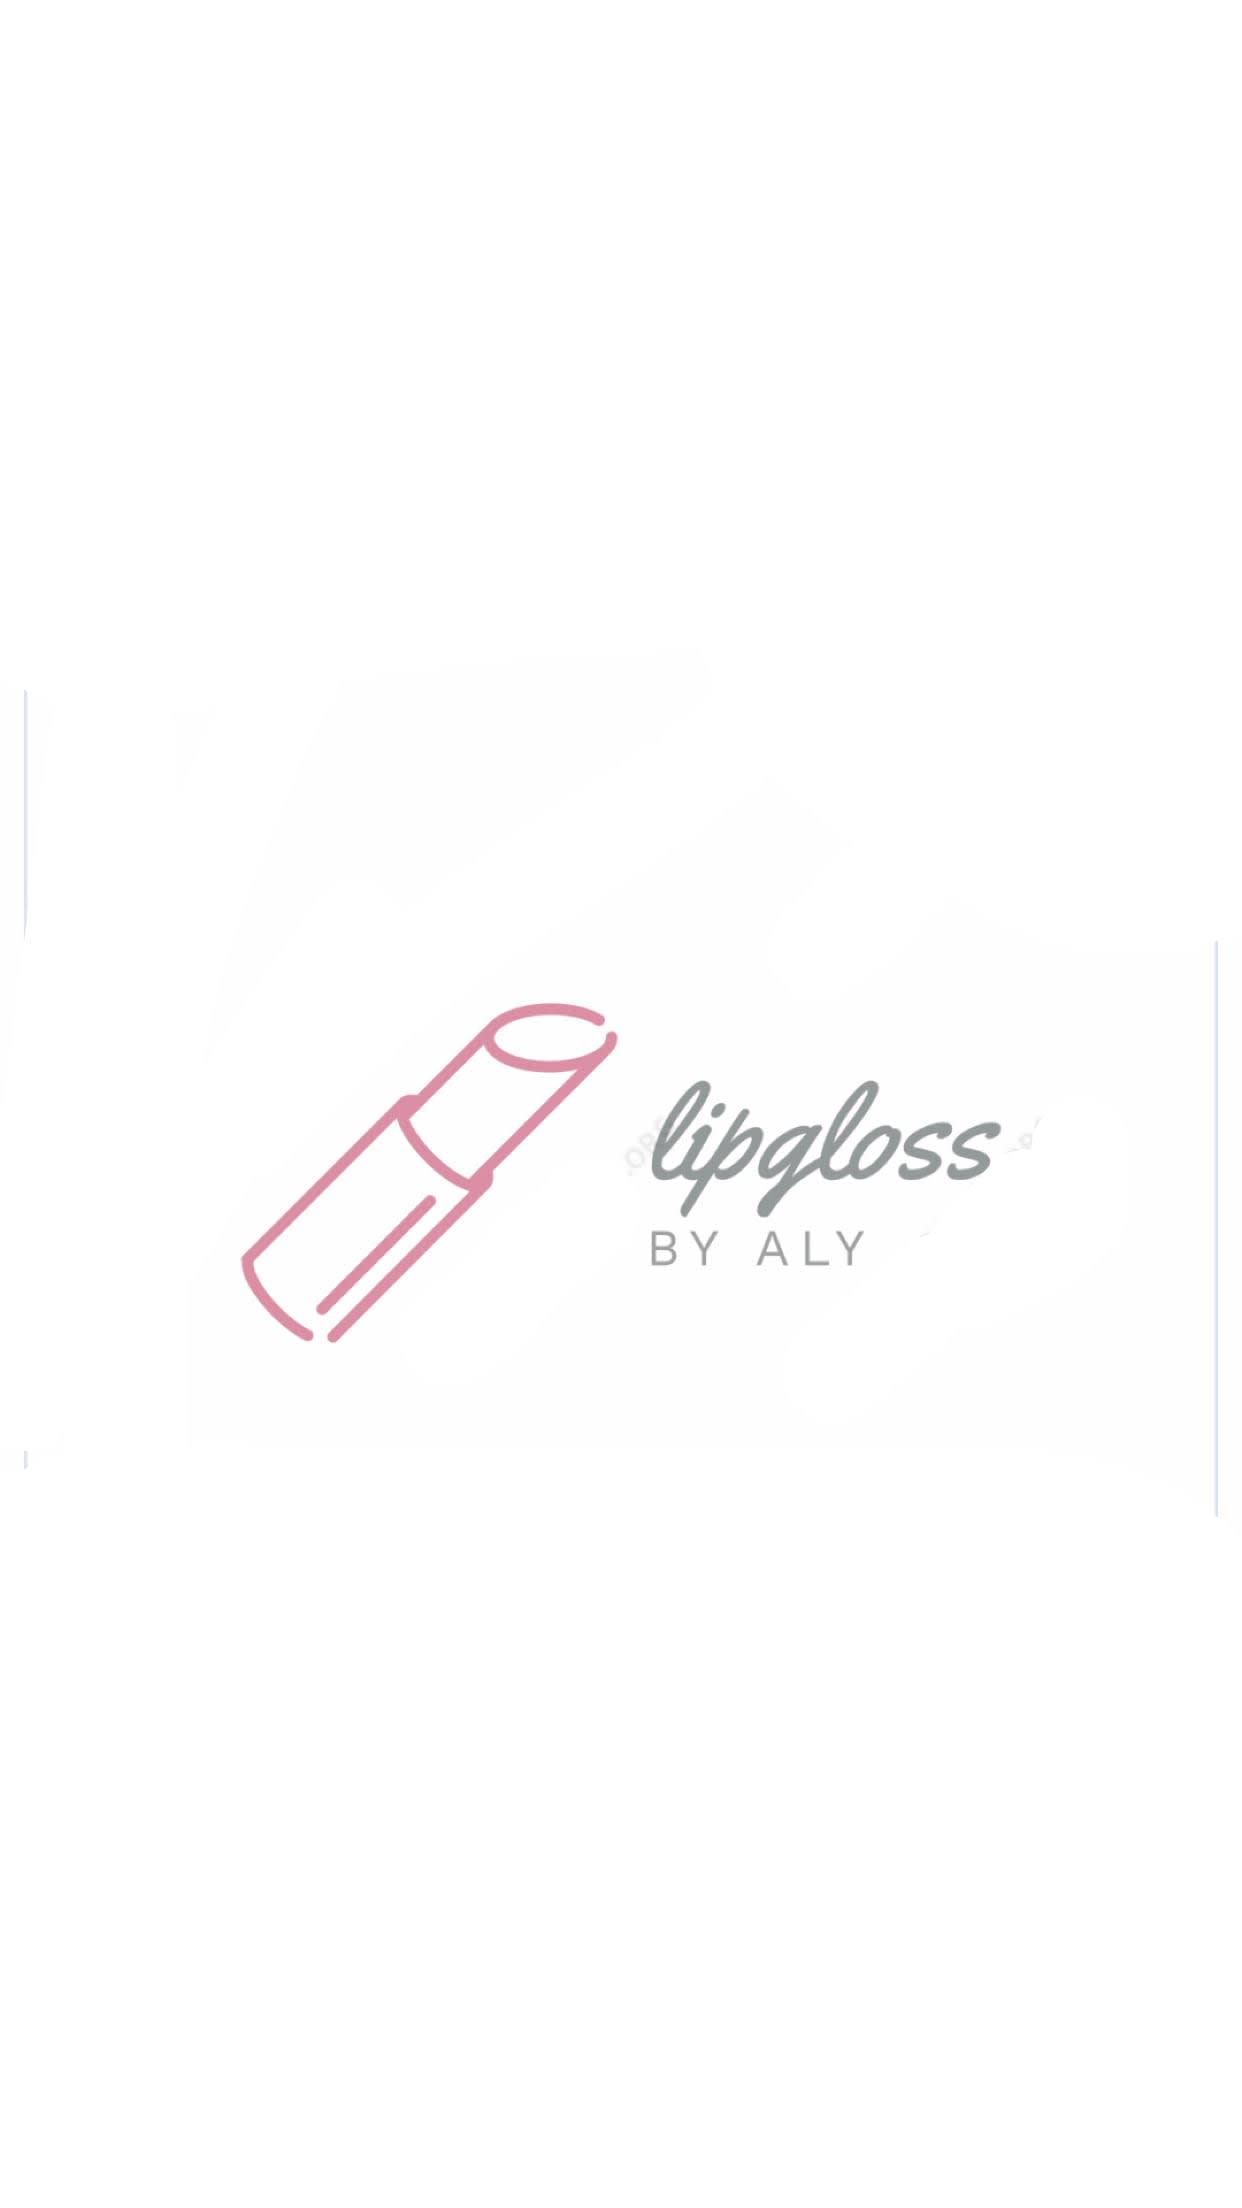 Lipgloss by Aly